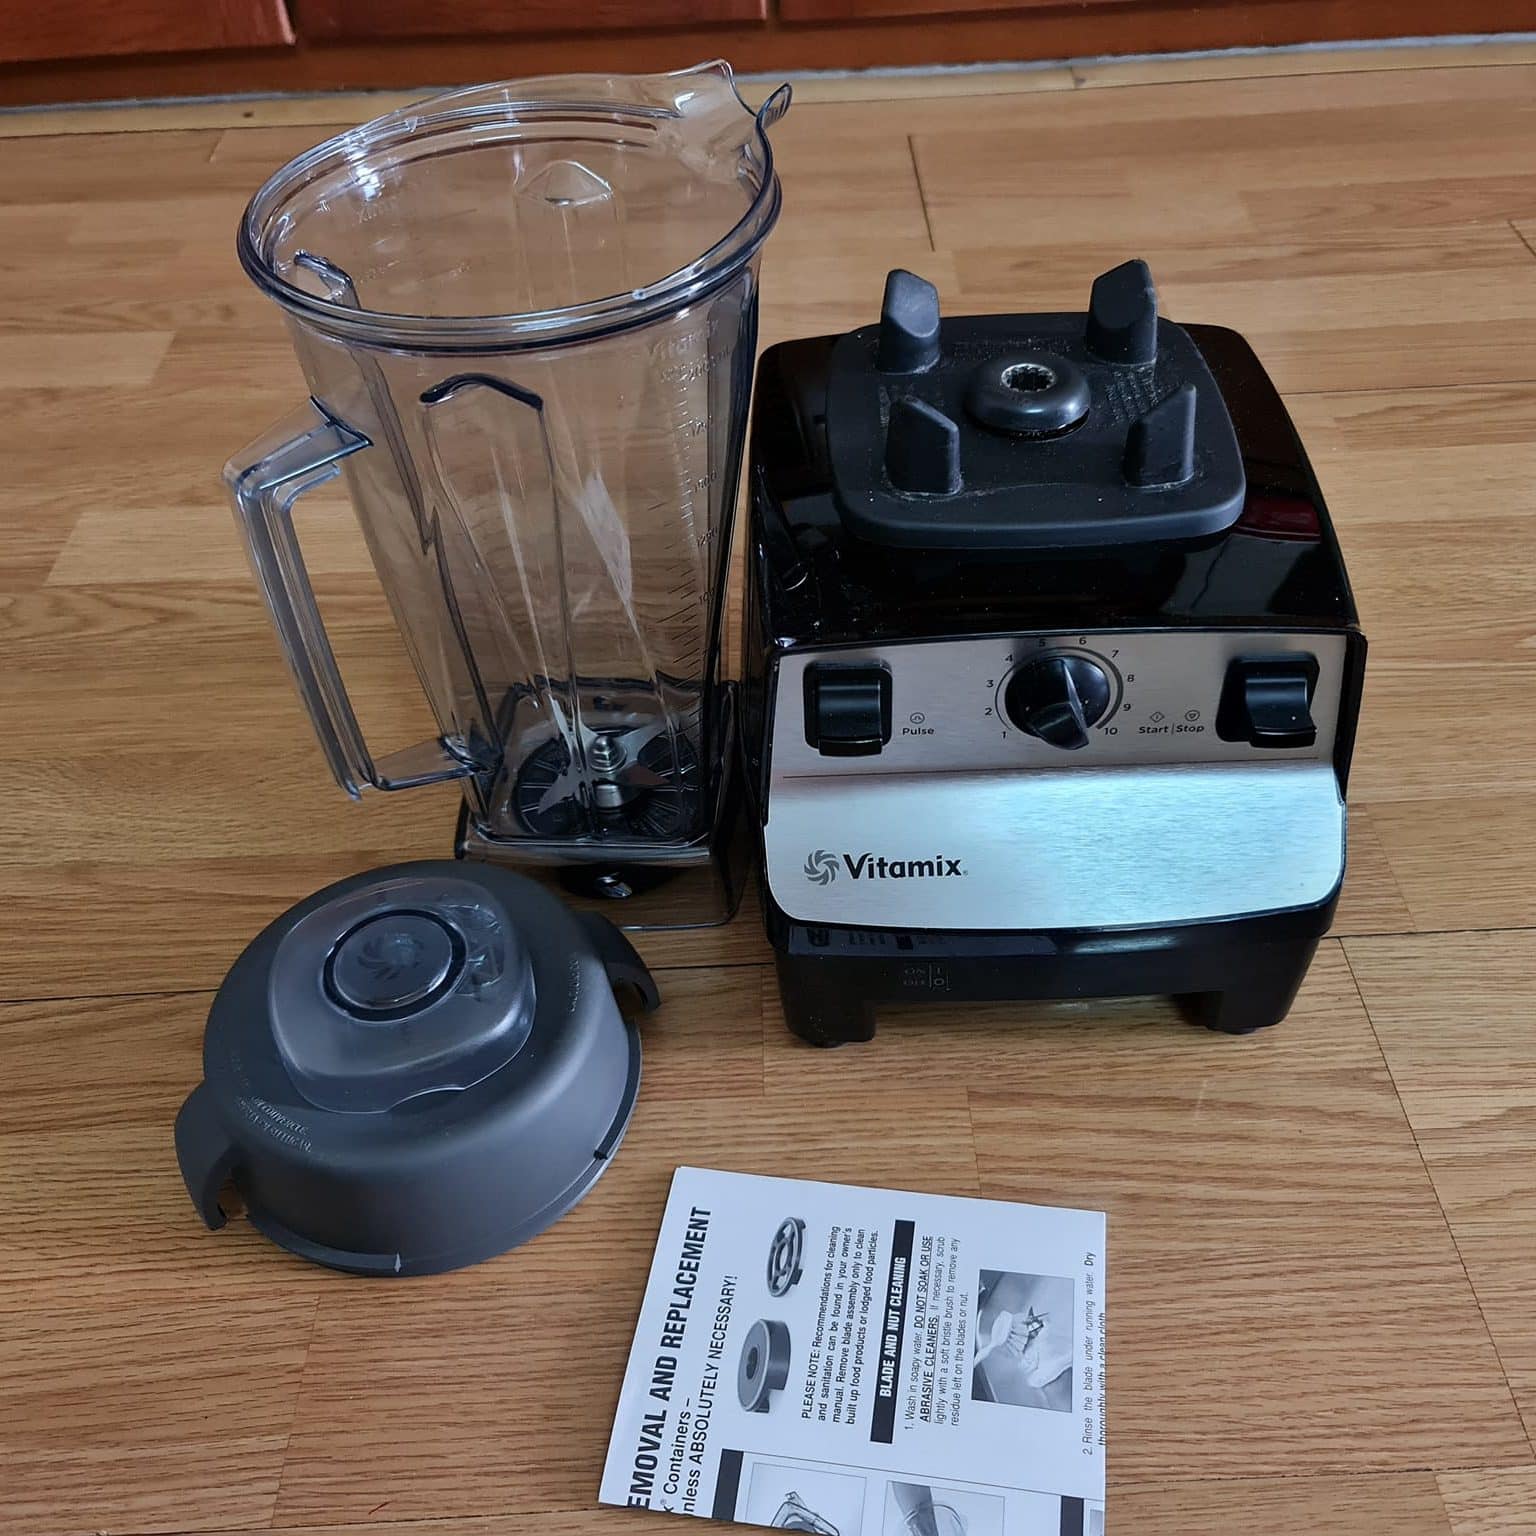 Vitamix 5300 has many easy-recognized features